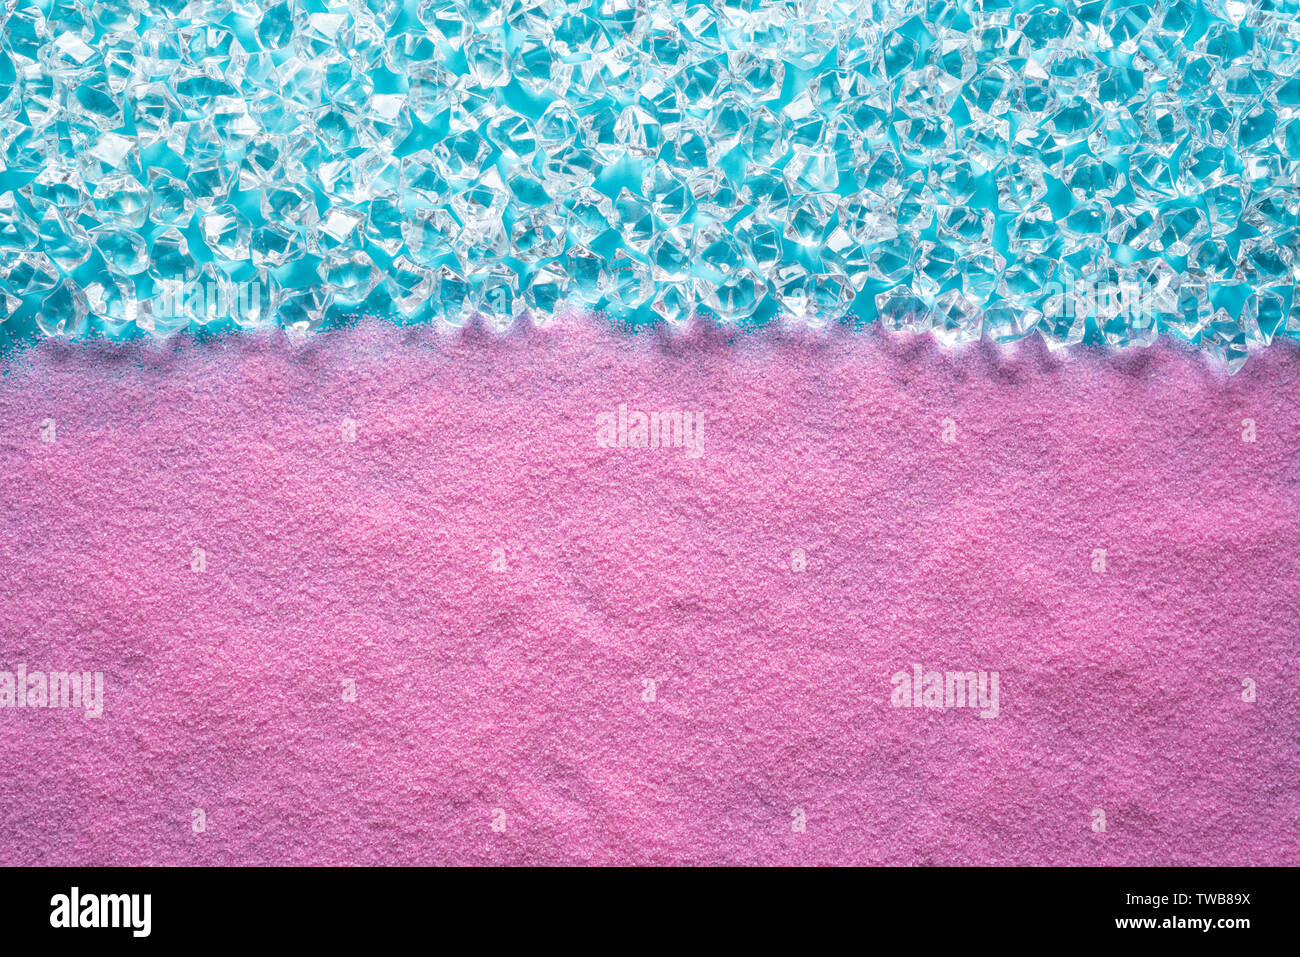 Pink beach sand background with aqua turquoise water abstract concept background Stock Photo